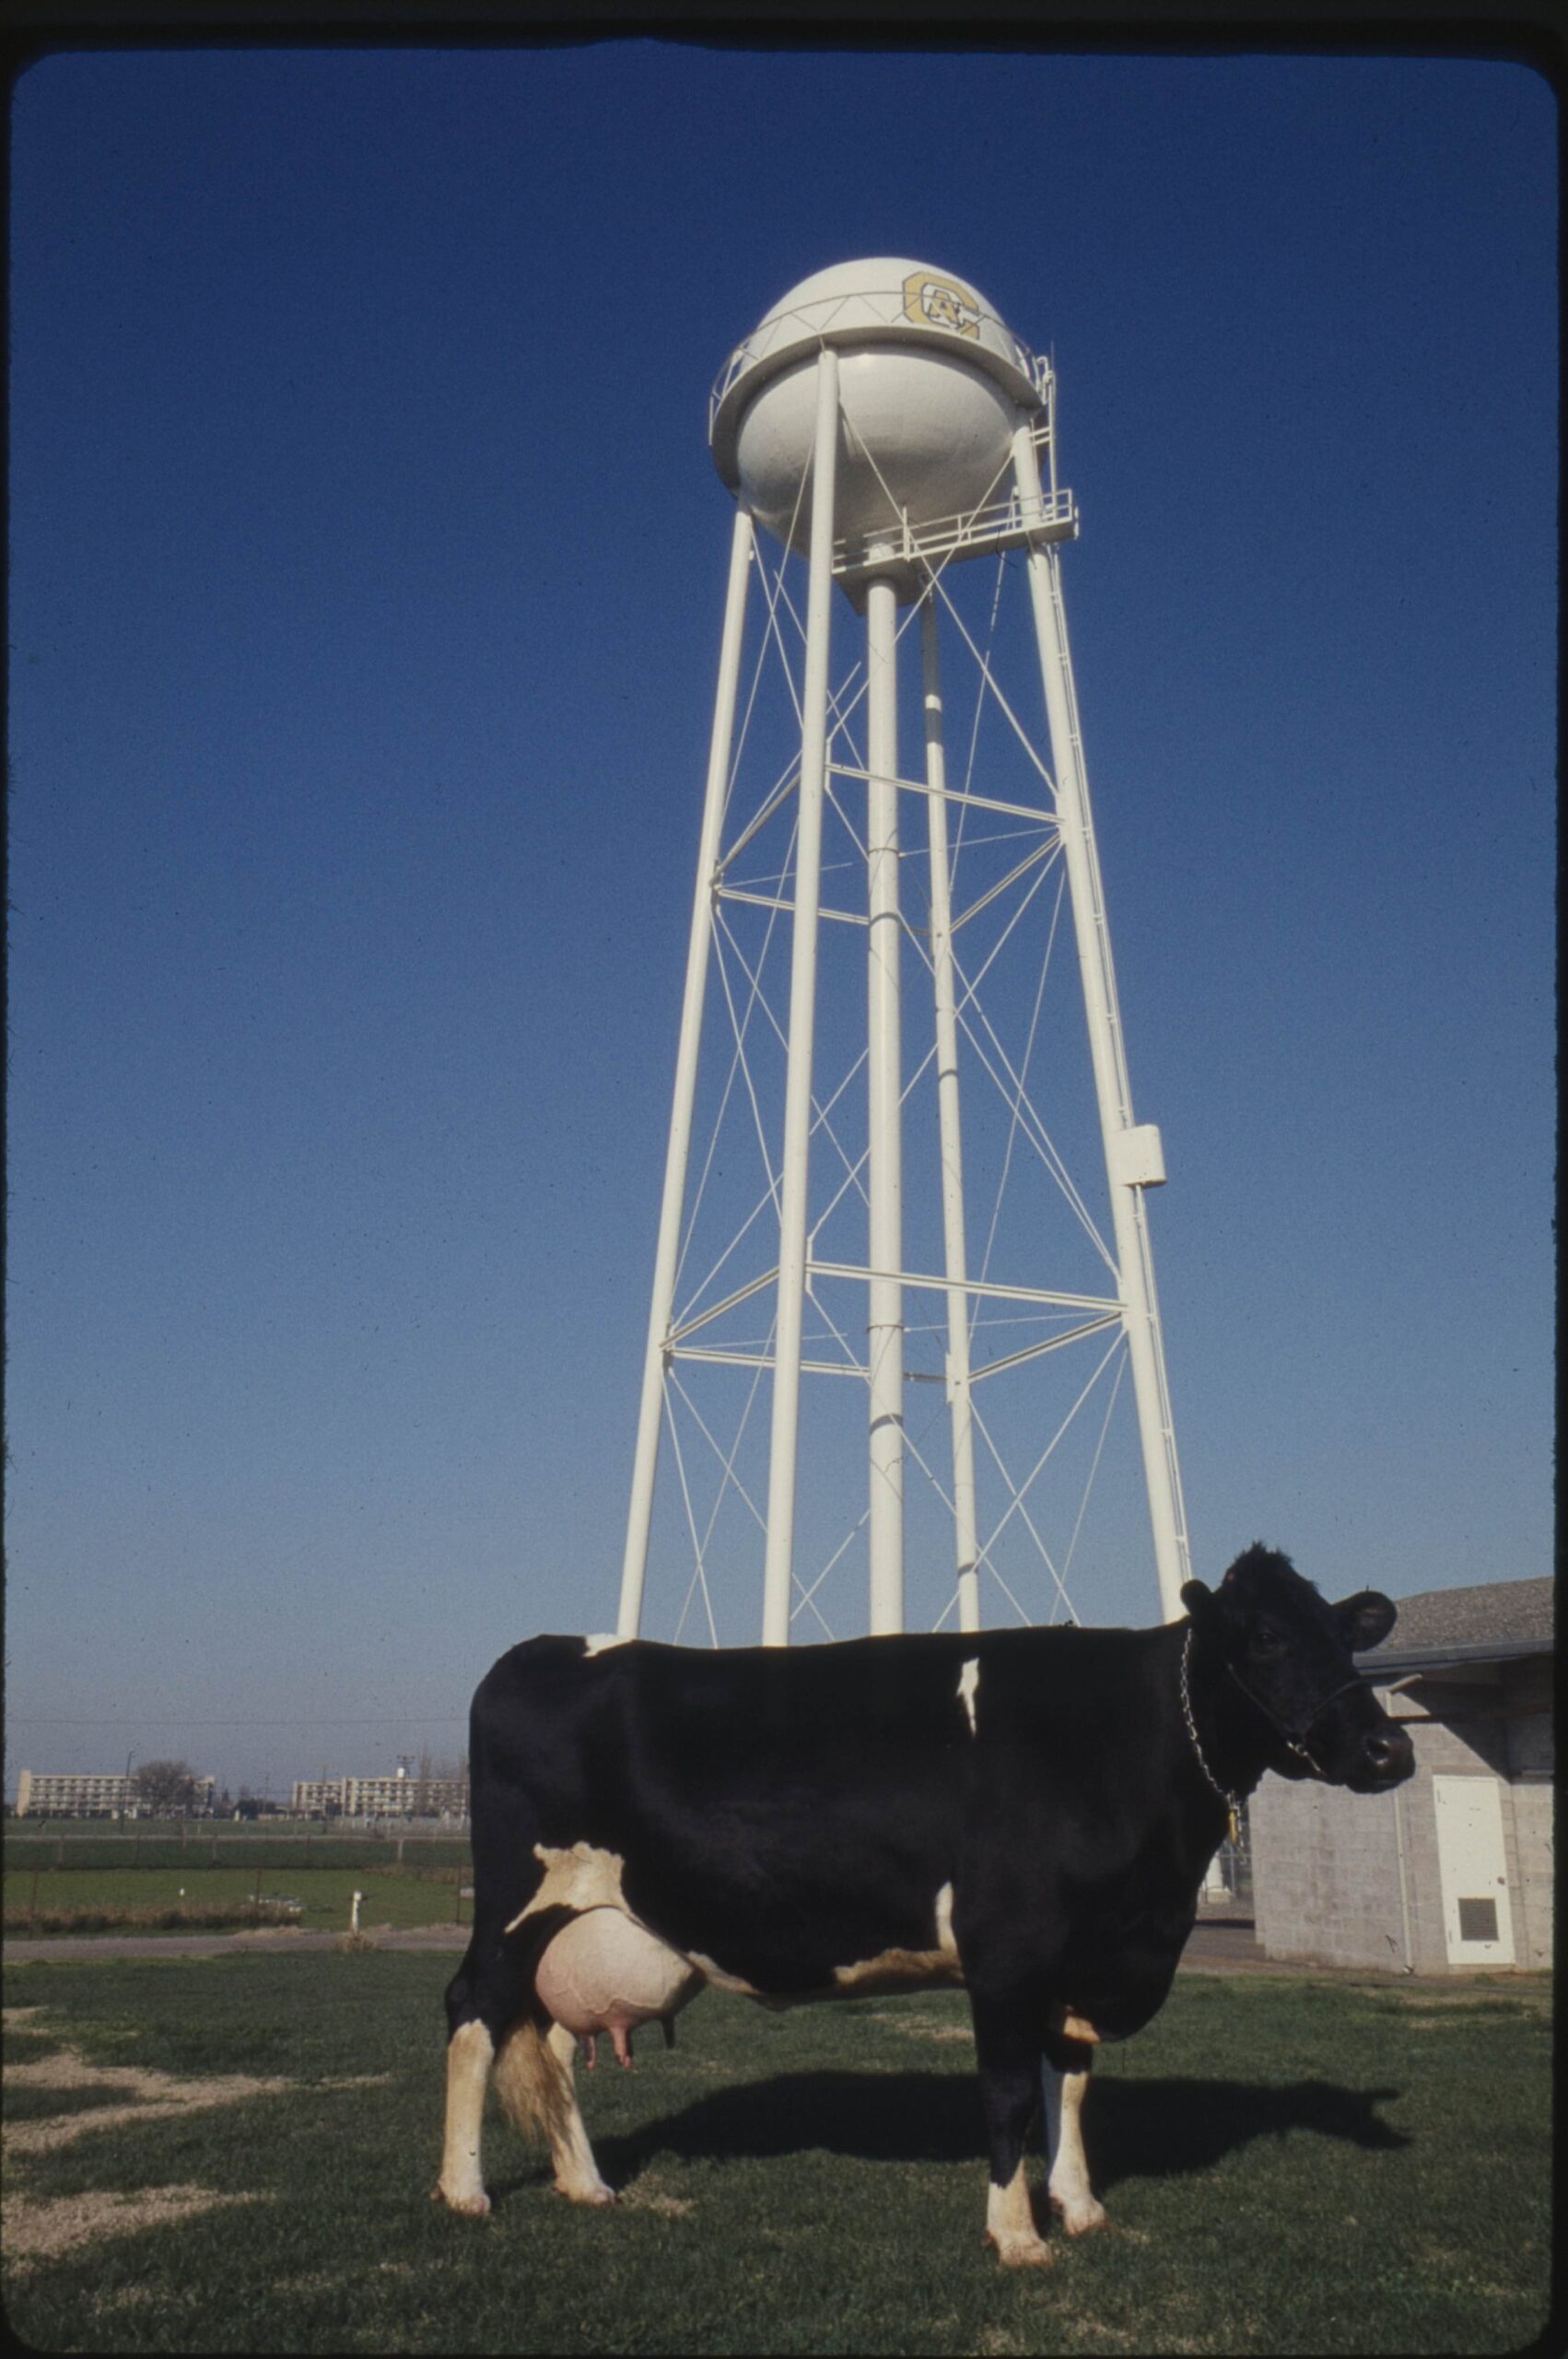 A dairy cow in profile with a water tower rising in the background